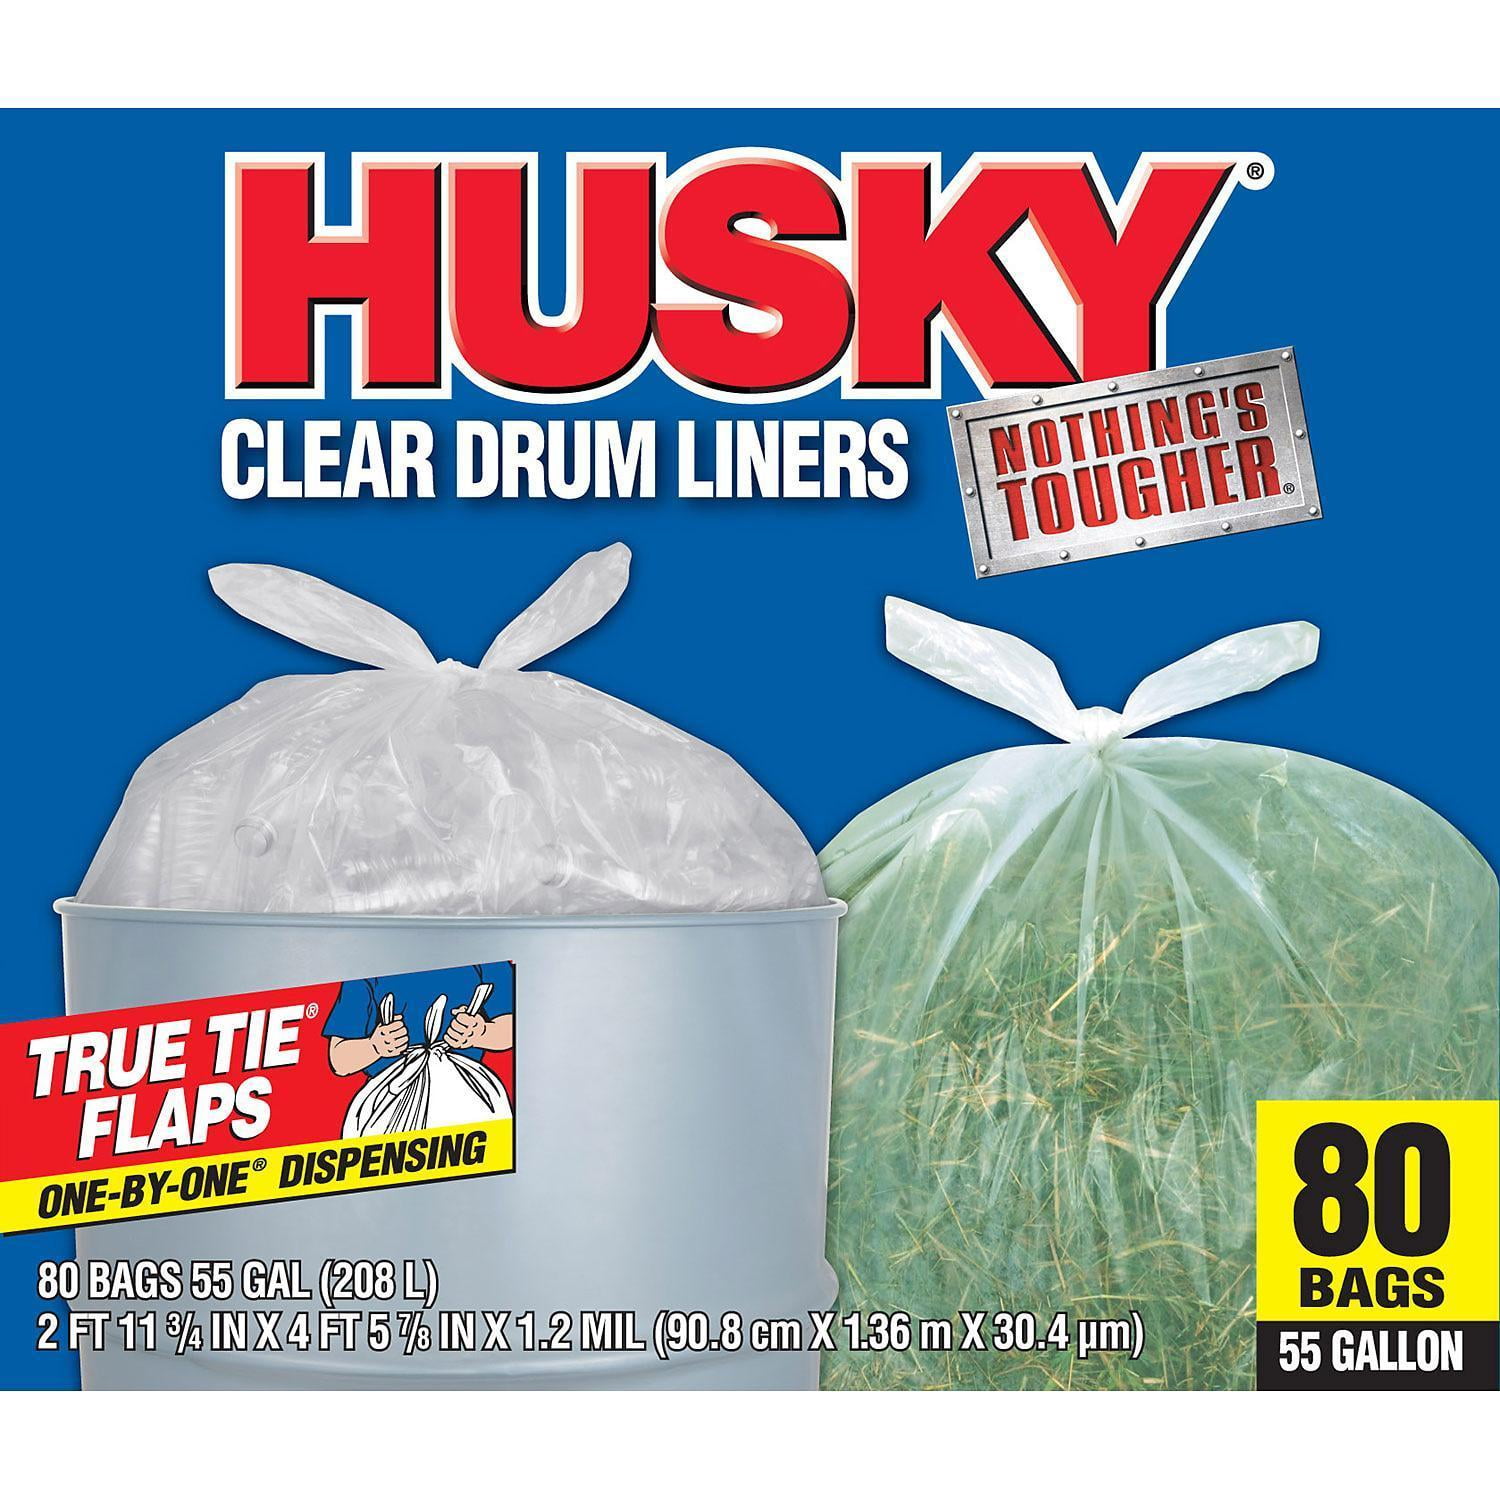 Drawstring Drum liners DTDRUM 55 gallon clear